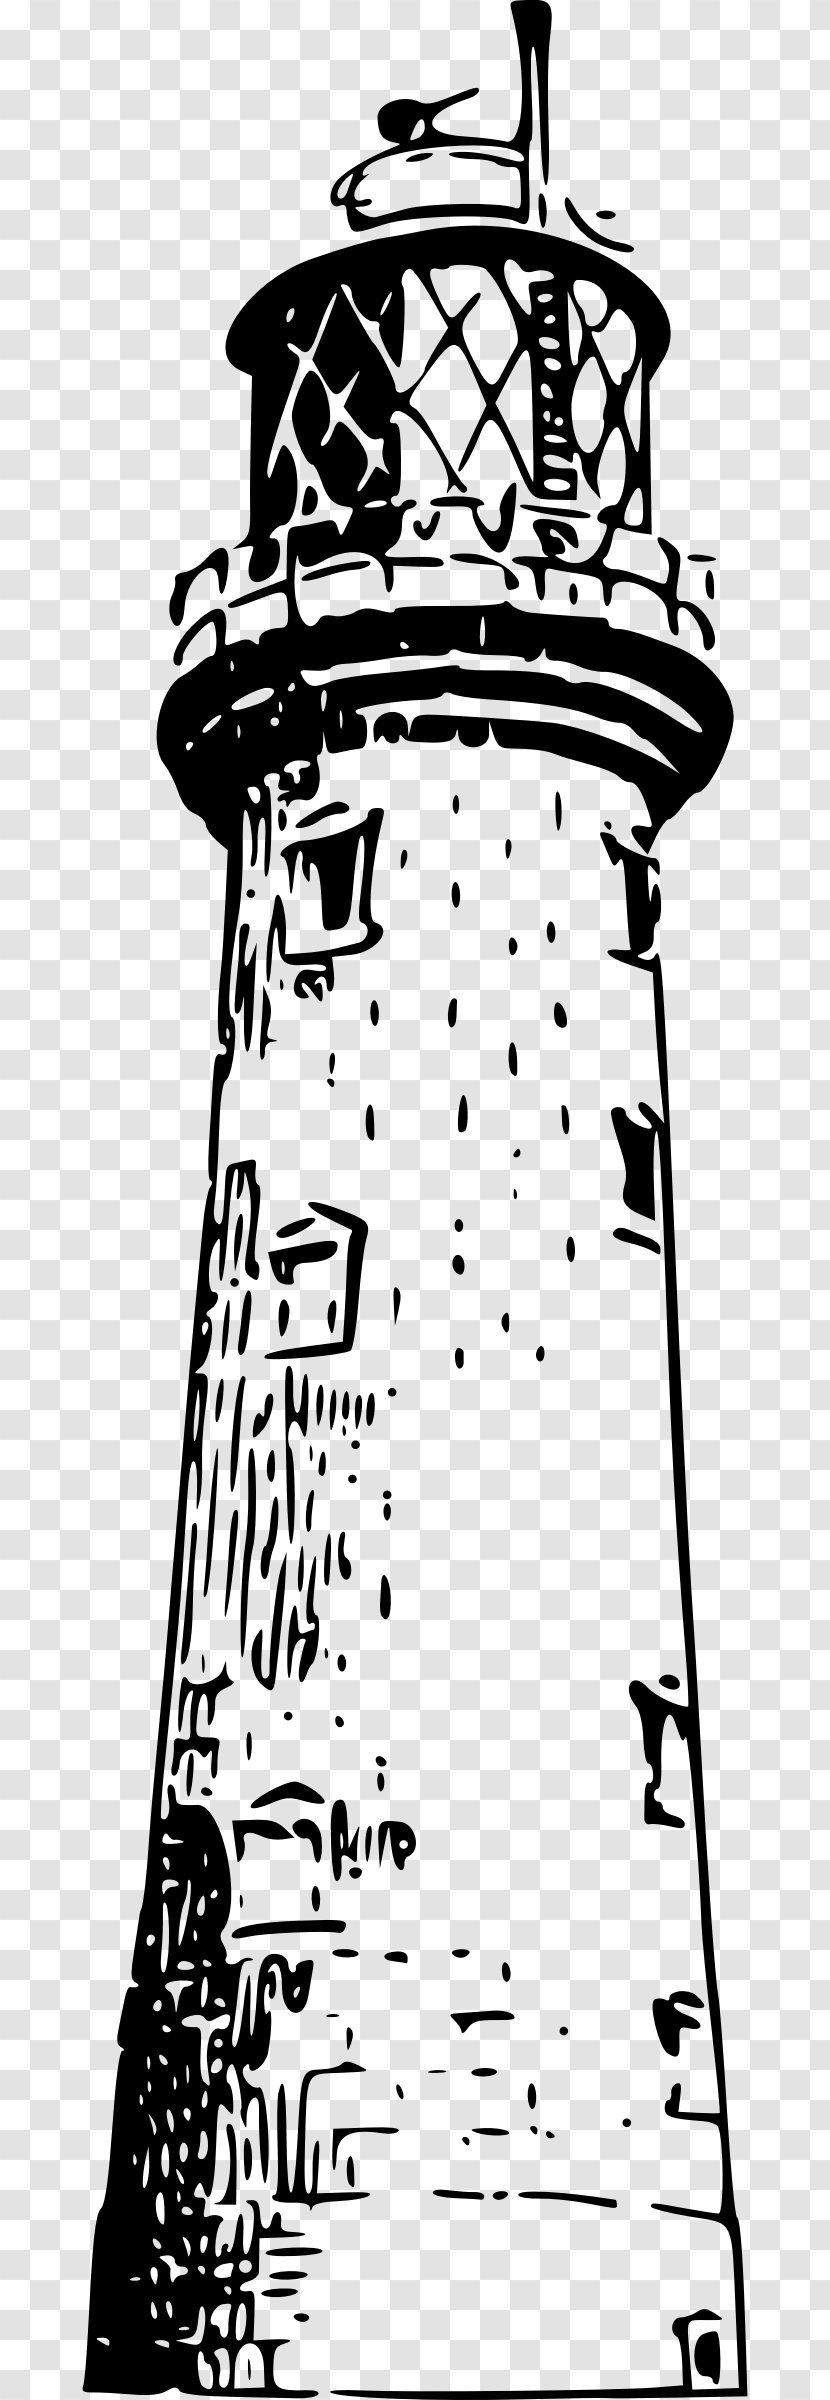 Lighthouse Tower Clip Art - Black And White Transparent PNG